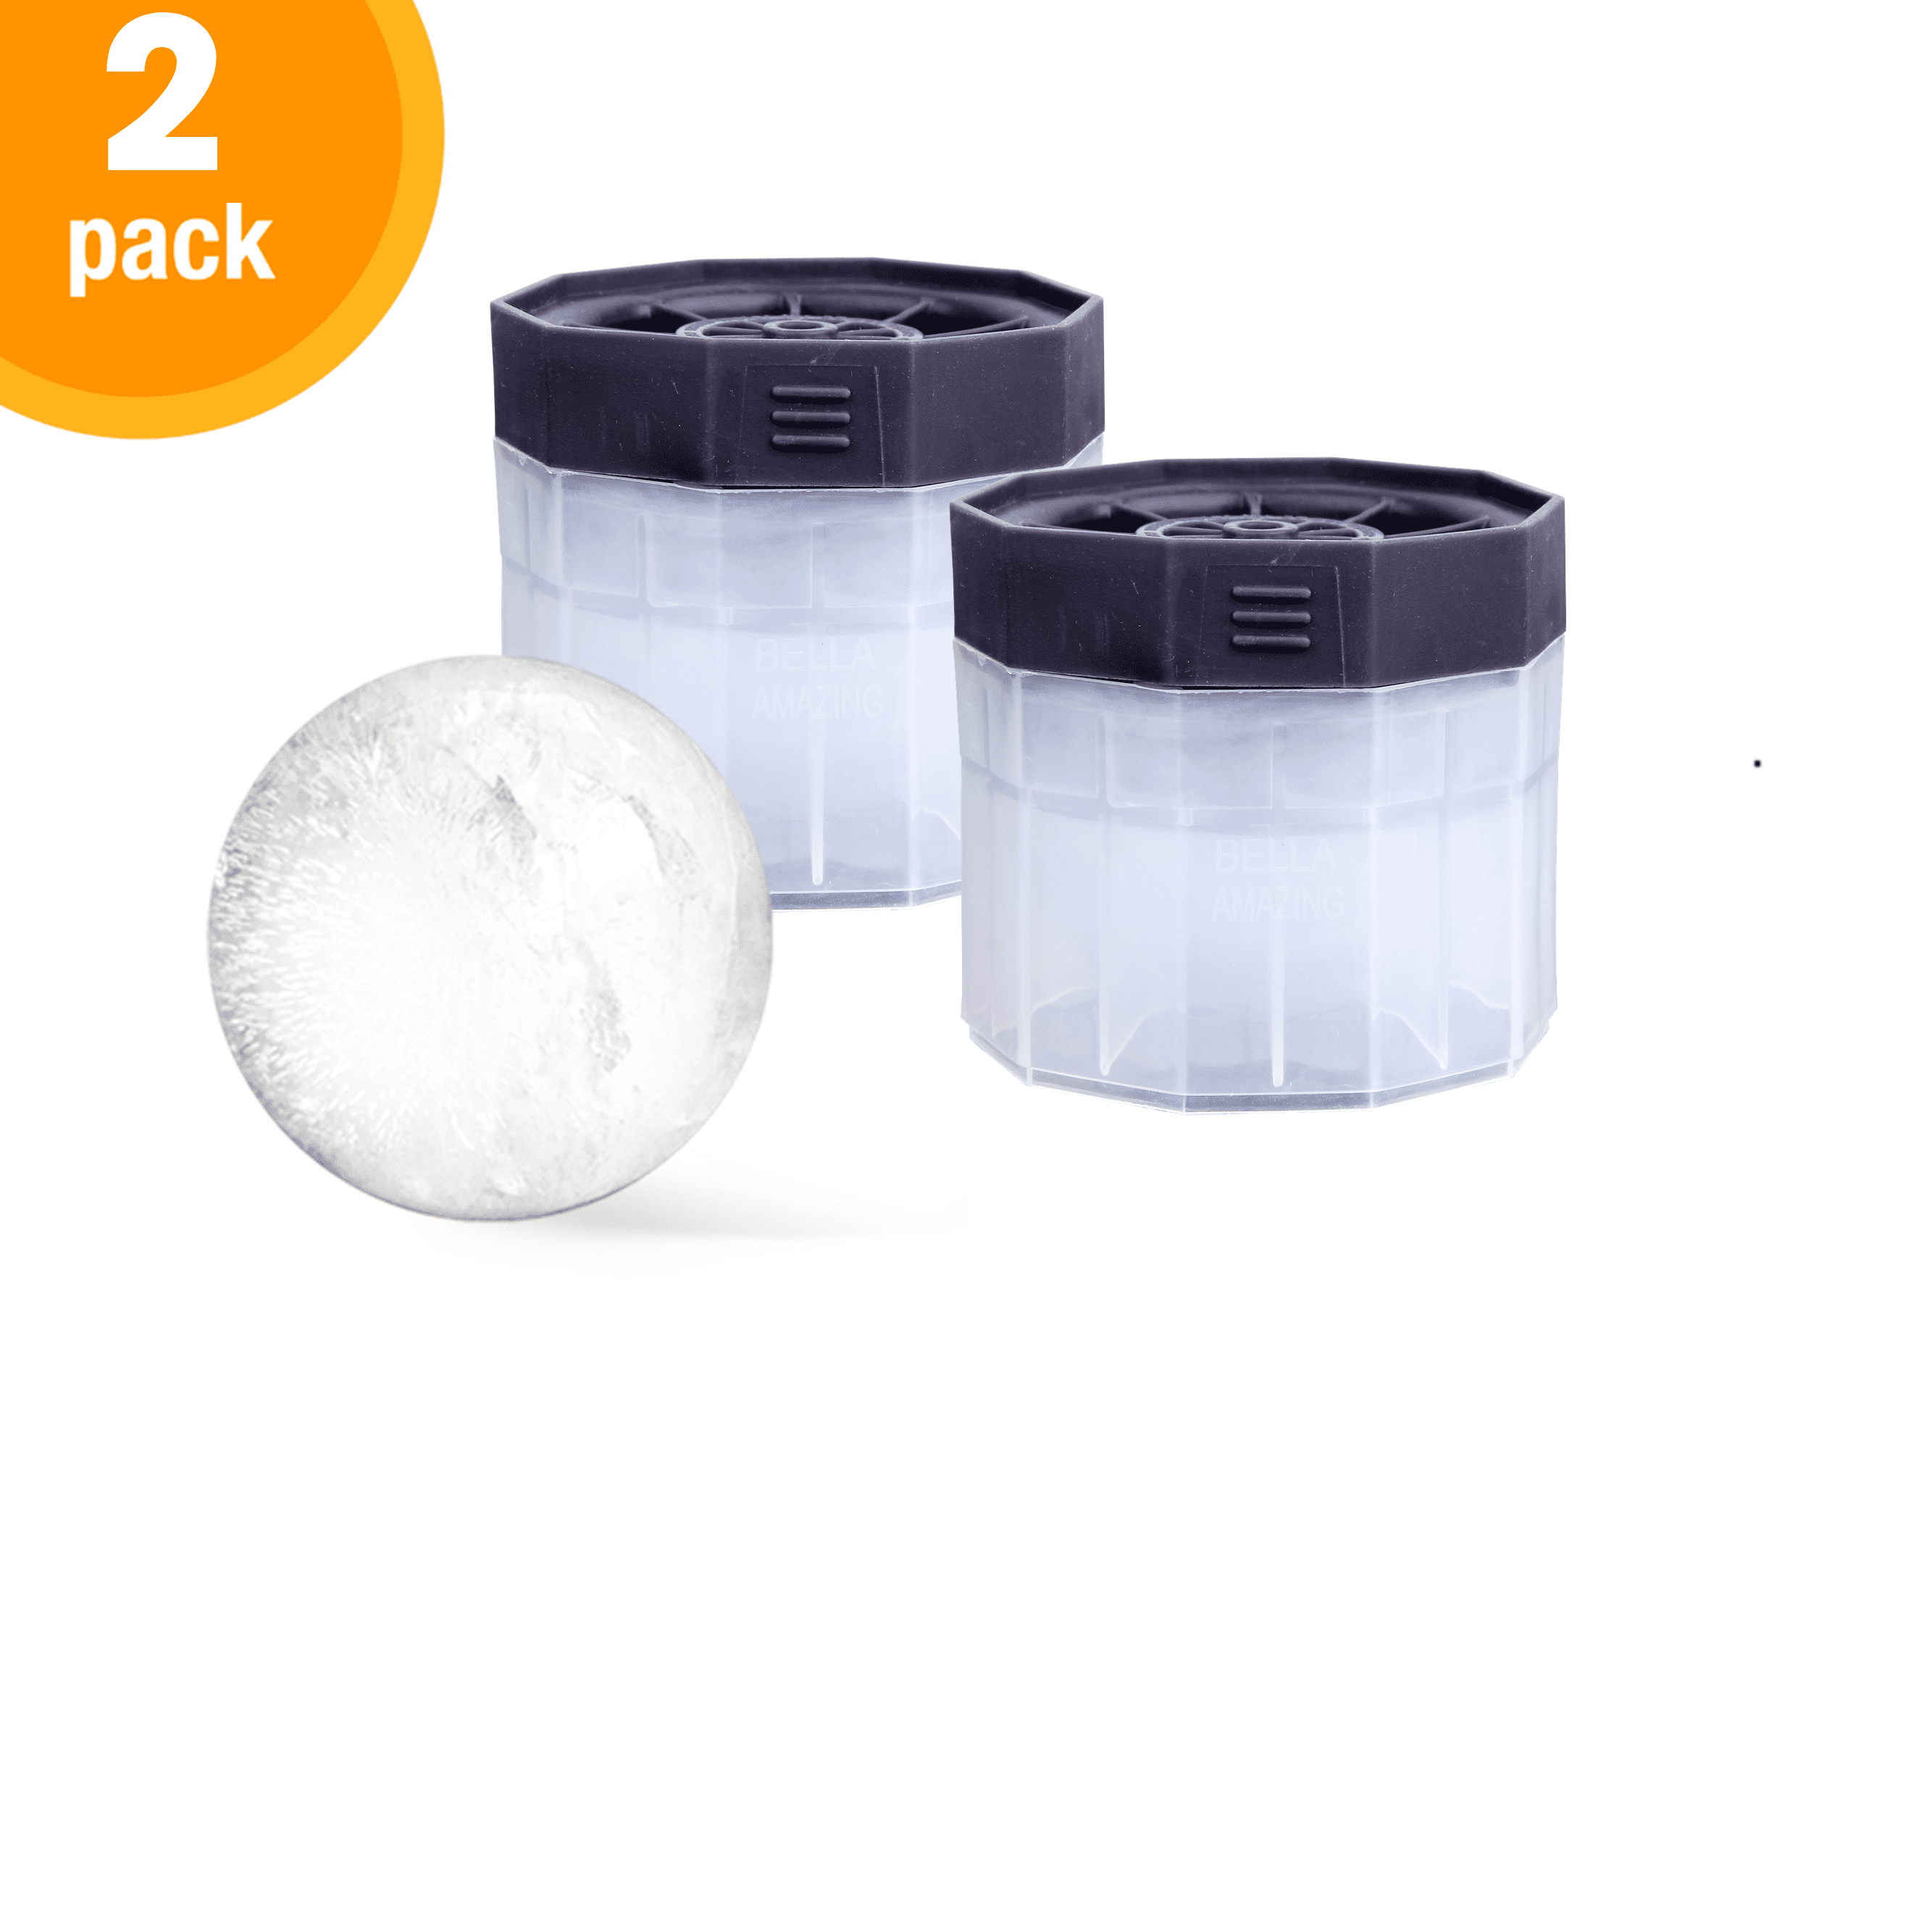 1pc Round Ice Cube Mold - With Silicone Ice Ball Maker Mold - Whiskey Ice  Mold - Makes 2.5-inch Large Ice Balls For Whiskey And Cocktails,  Food-grade, Bpa-free, Pink